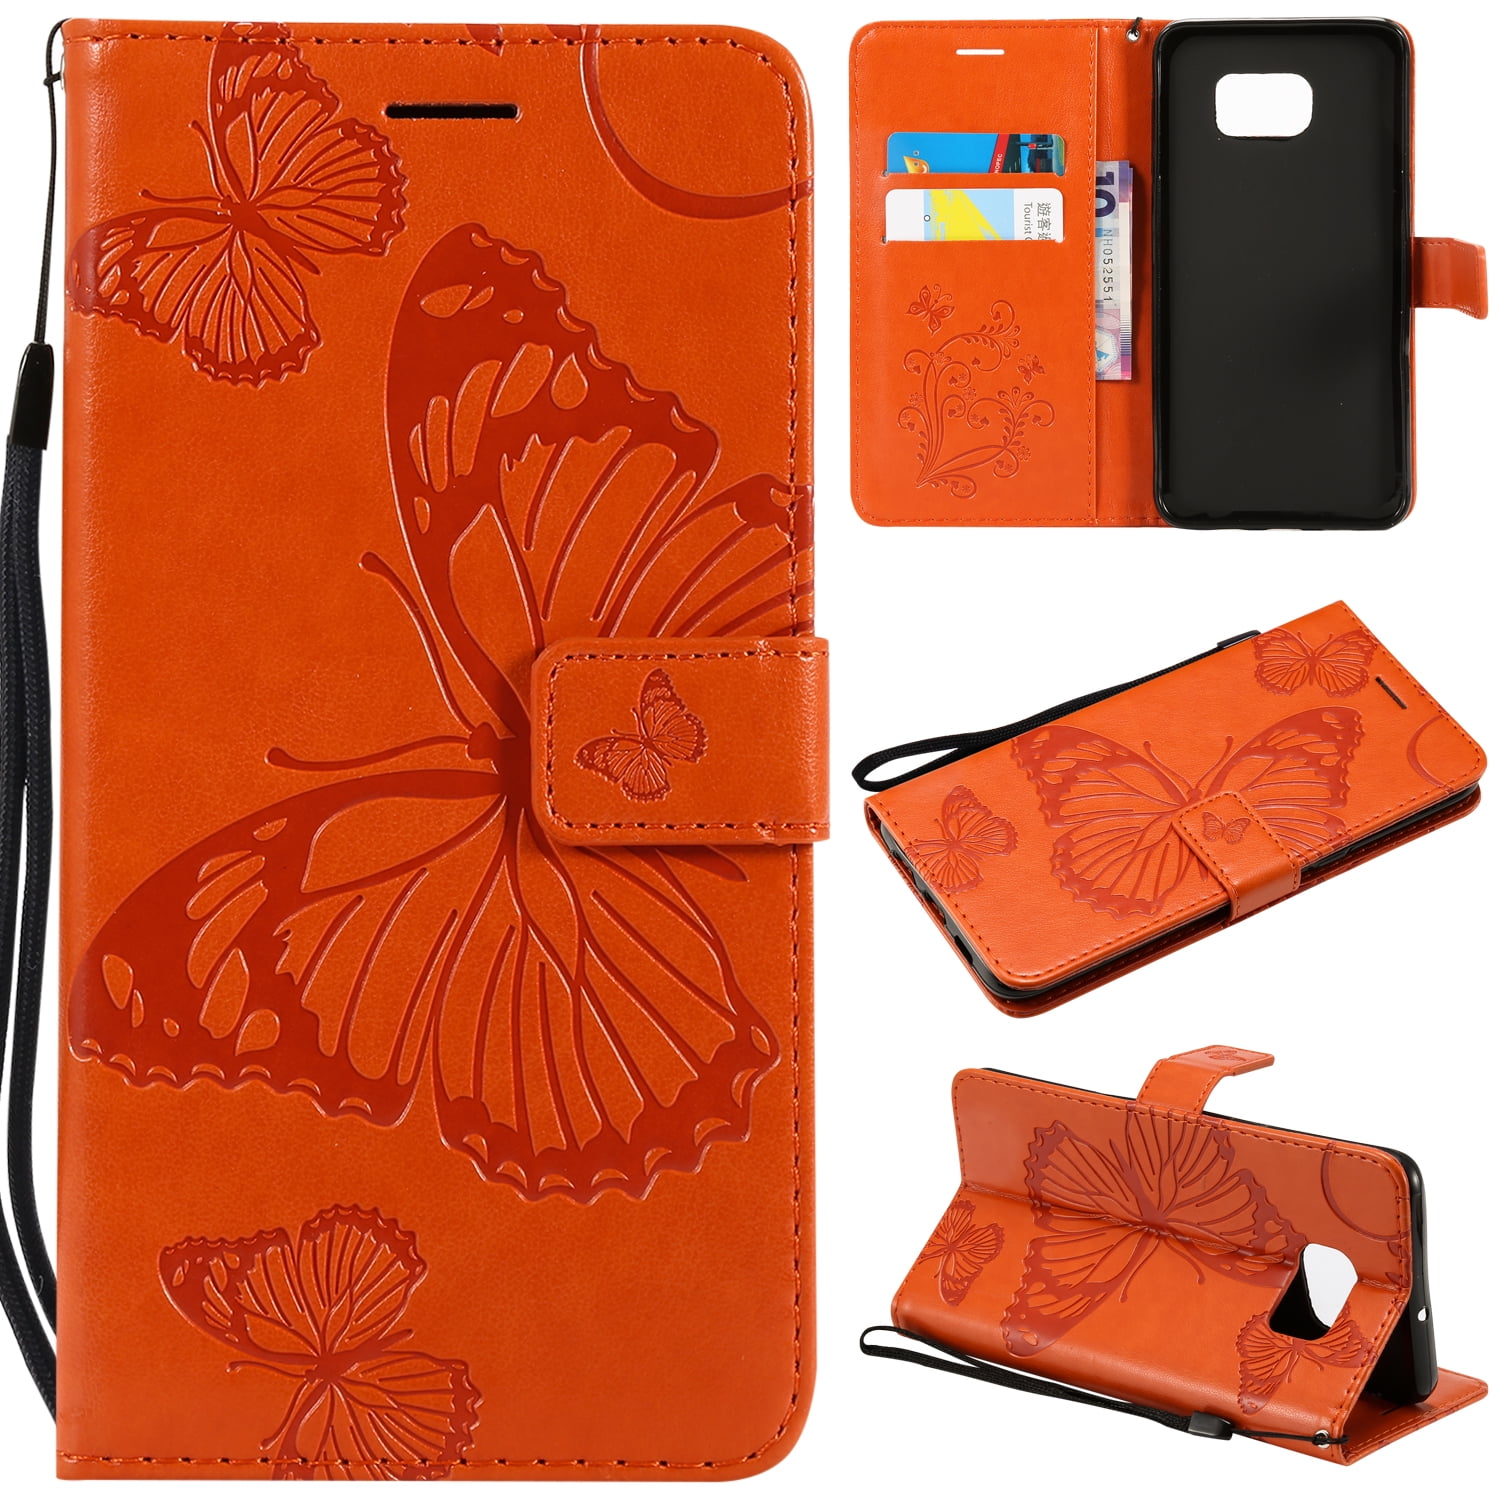 S6 Edge Case, Samsung Galaxy S6 Edge Case - Allytech Premium Wallet PU Leather with Fashion Embossed Floral Butterfly Magnetic Clasp Card Holders Flip with Hand Strap, Orange - Walmart.com